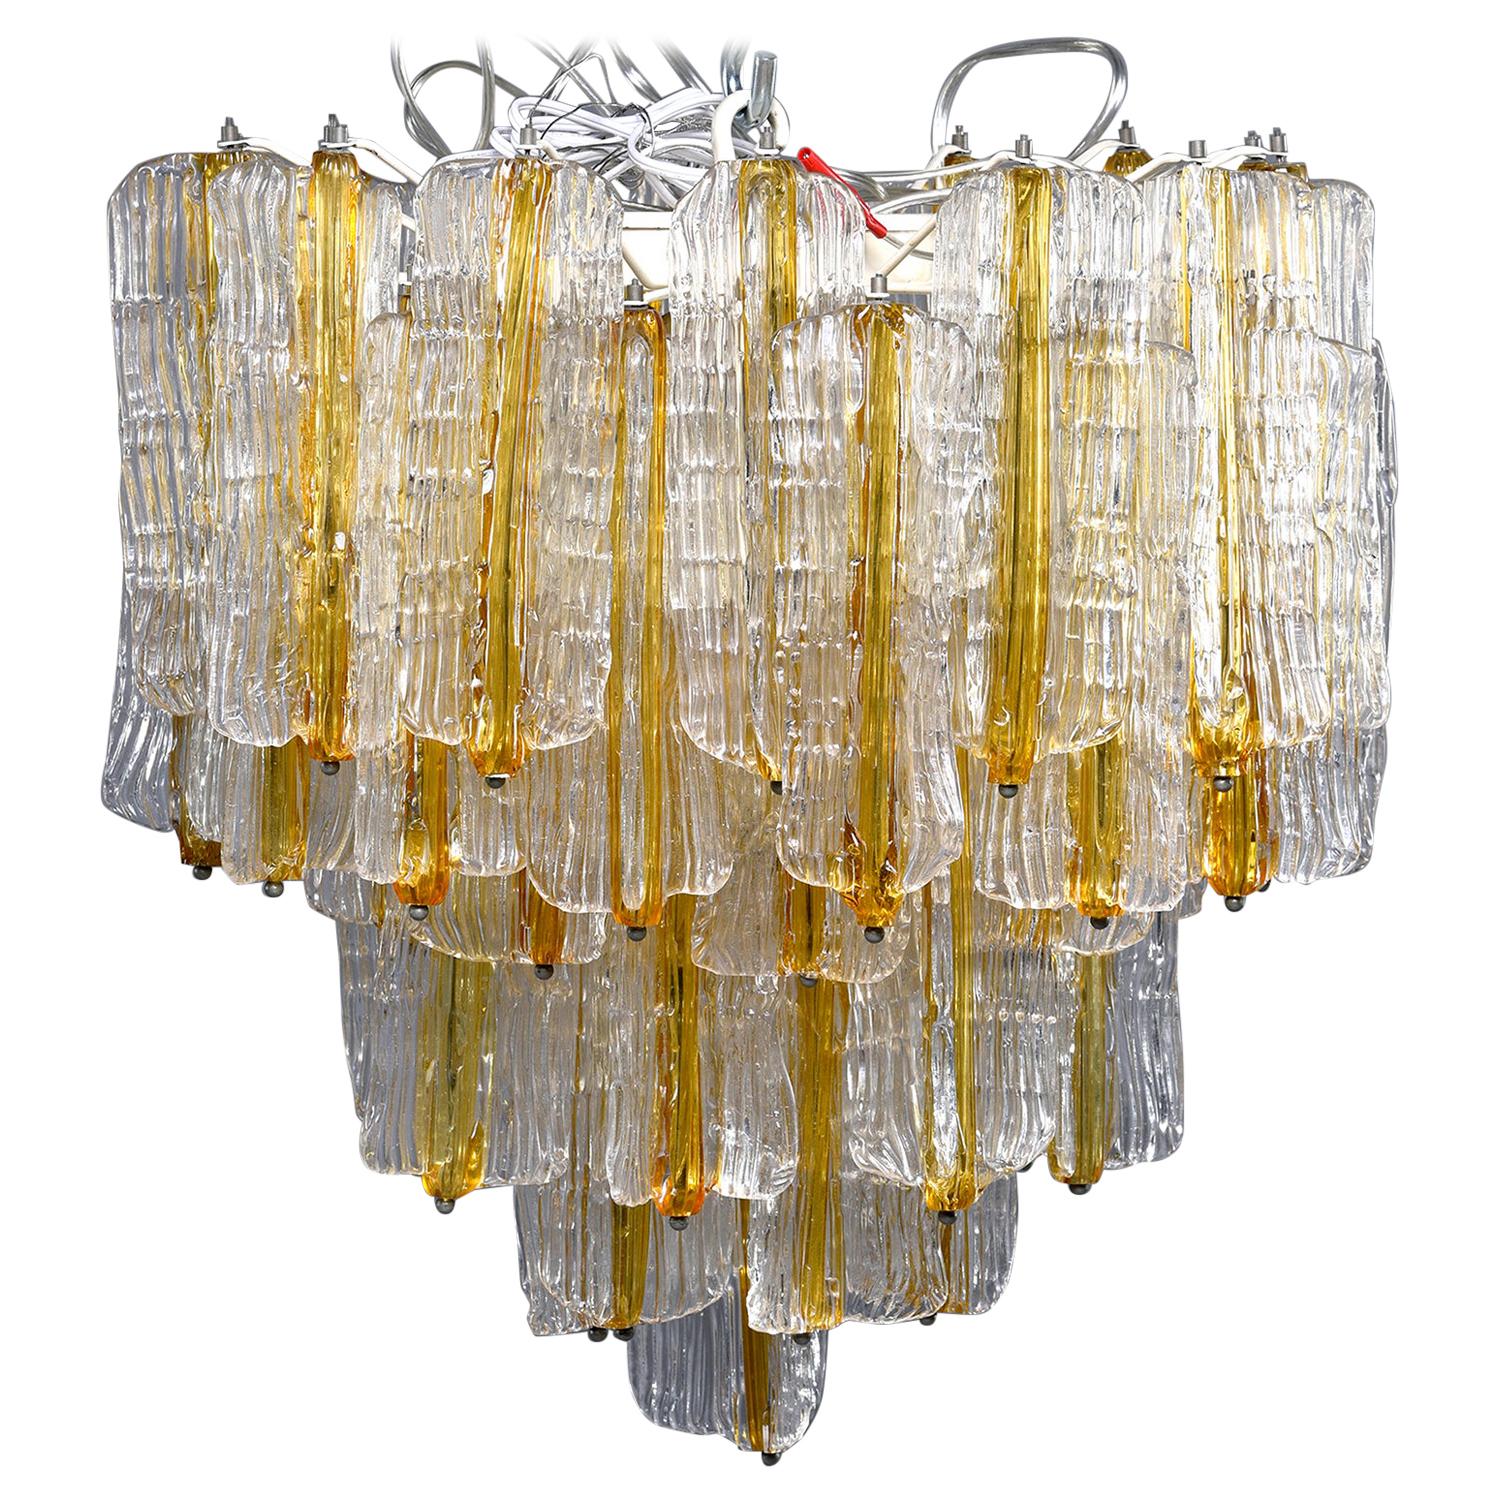 Toni Zuccheri for Venini Chandelier in Two-Toned Glass at 1stDibs